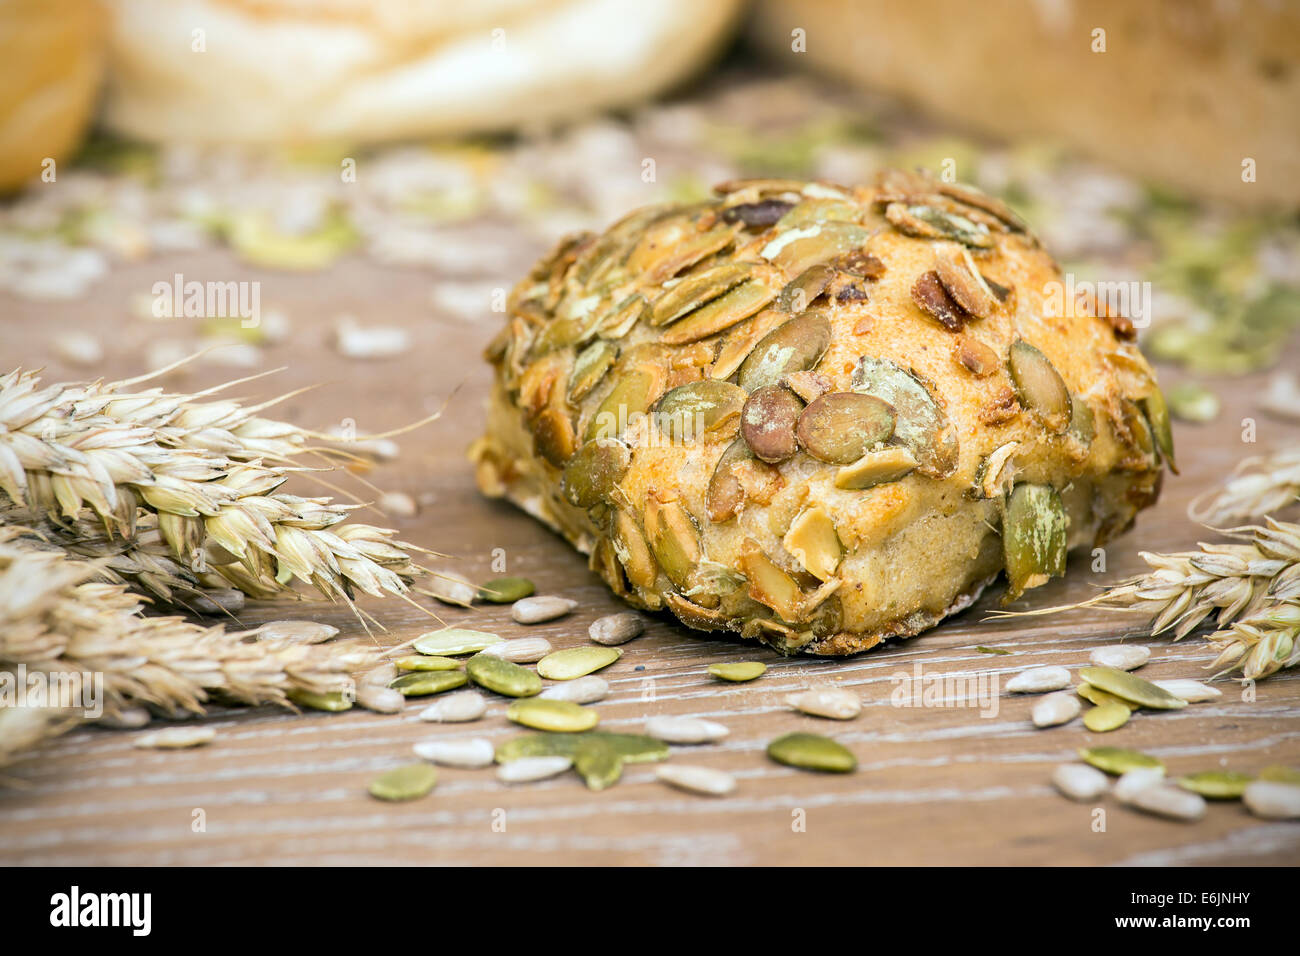 Freshly baked roll with pumpkin seeds on wooden table Stock Photo